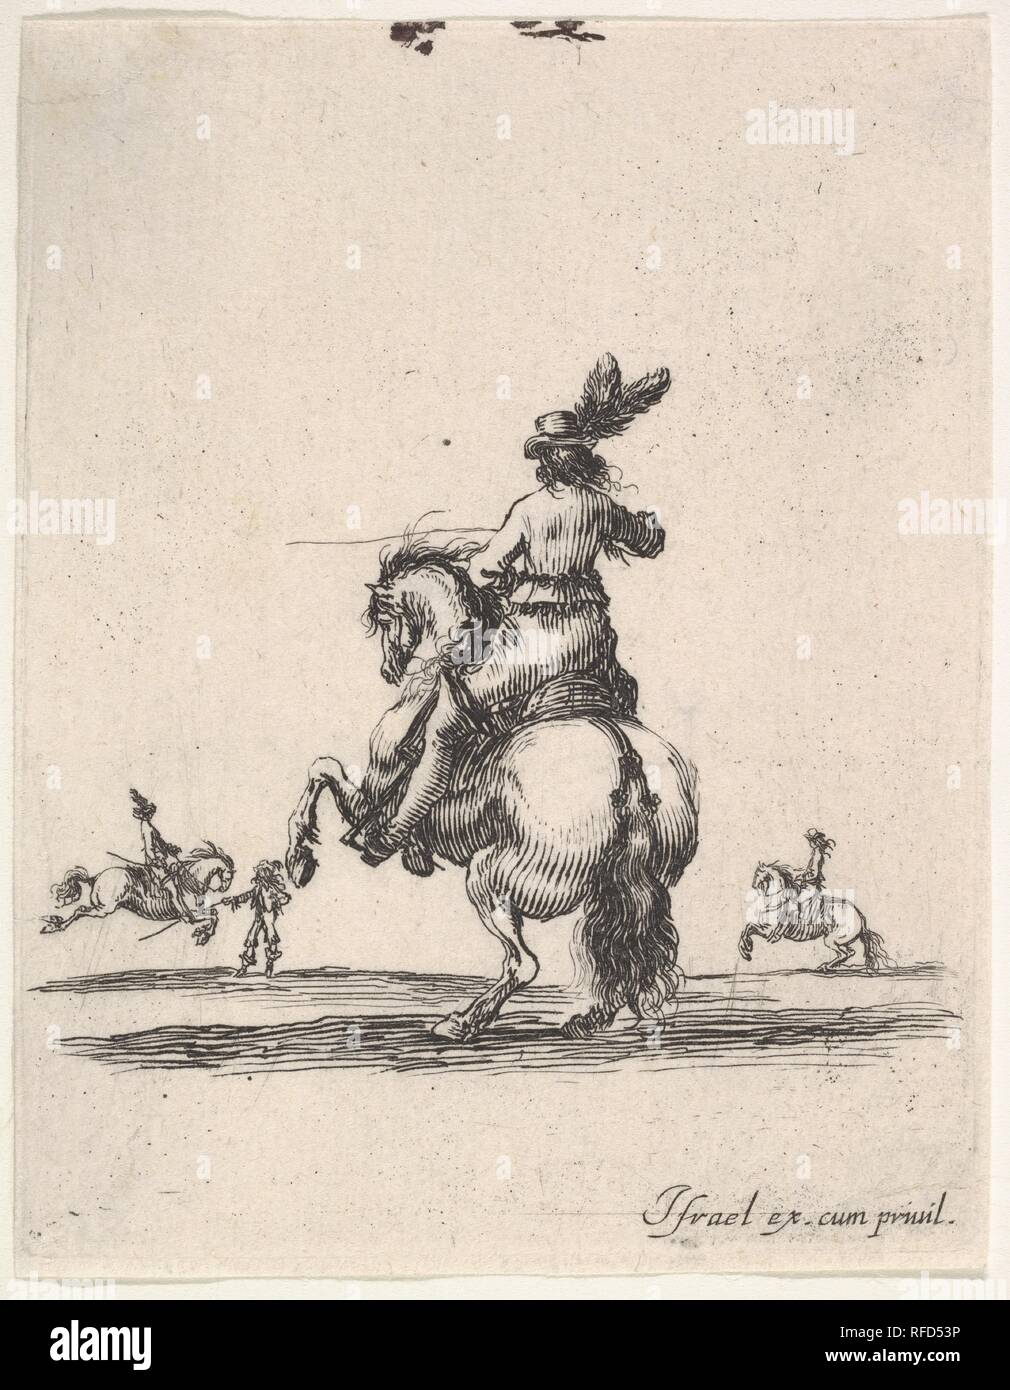 A horseman atop a rearing horse, seen from behind and turned towards the left, two horsemen in the background, from 'Various cavalry exercises' (Diverses exercices de cavalerie). Artist: Stefano della Bella (Italian, Florence 1610-1664 Florence). Dimensions: Sheet: 3 7/16 x 2 11/16 in. (8.8 x 6.8 cm). Publisher: Israël Henriet (French, Nancy ca. 1590-1661 Paris). Series/Portfolio: 'Various cavalry exercises' (Diverses exercices de cavalerie). Date: ca. 1642-45. Museum: Metropolitan Museum of Art, New York, USA. Stock Photo